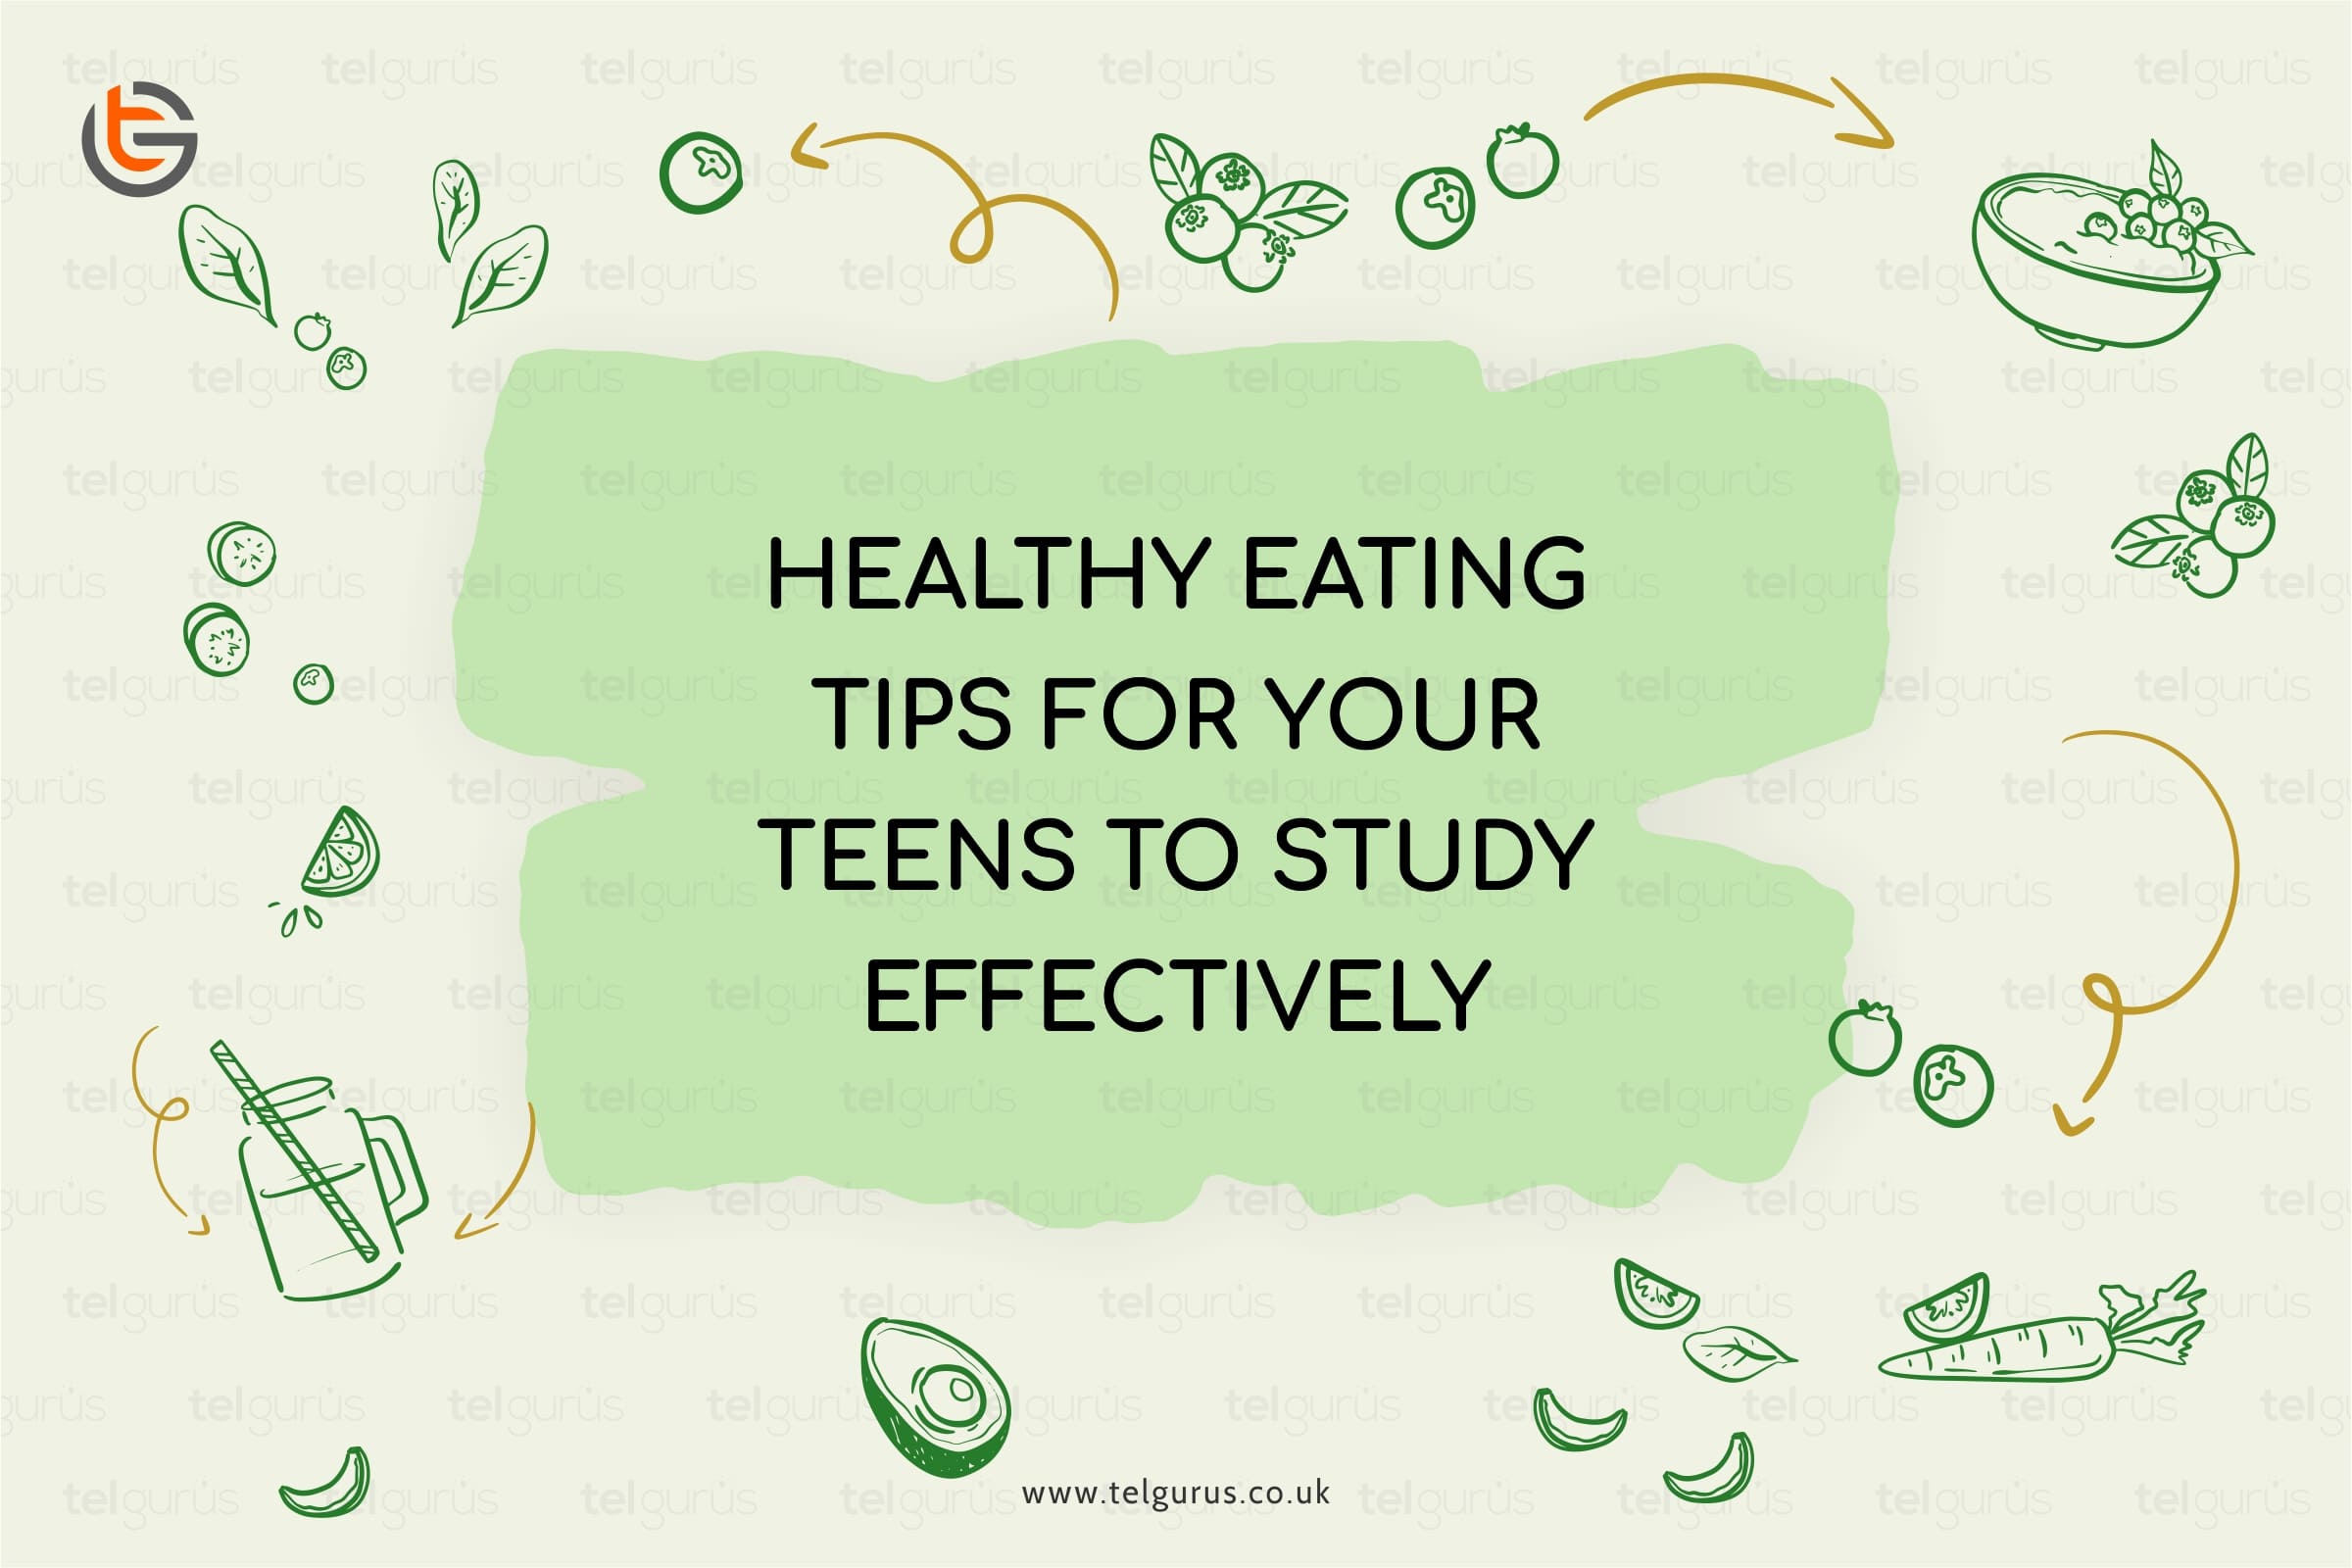 Healthy Eating Tips for Your Teens to Study Effectively